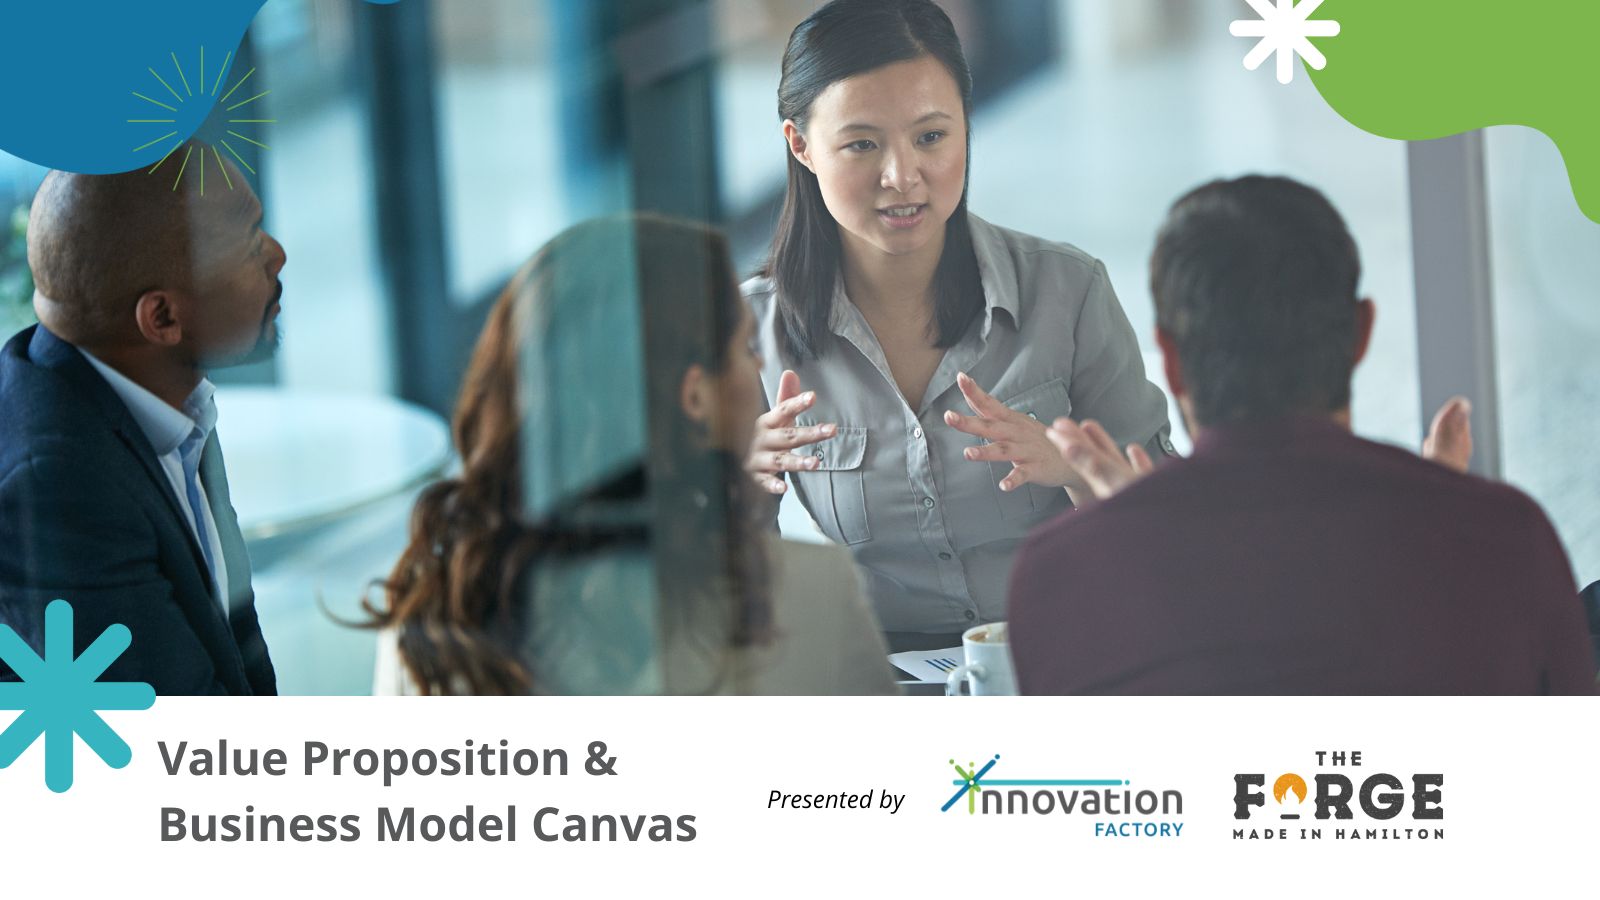 Value Proposition and Business Model Canvas presented by Innovation Factory and The Forge at McMaster